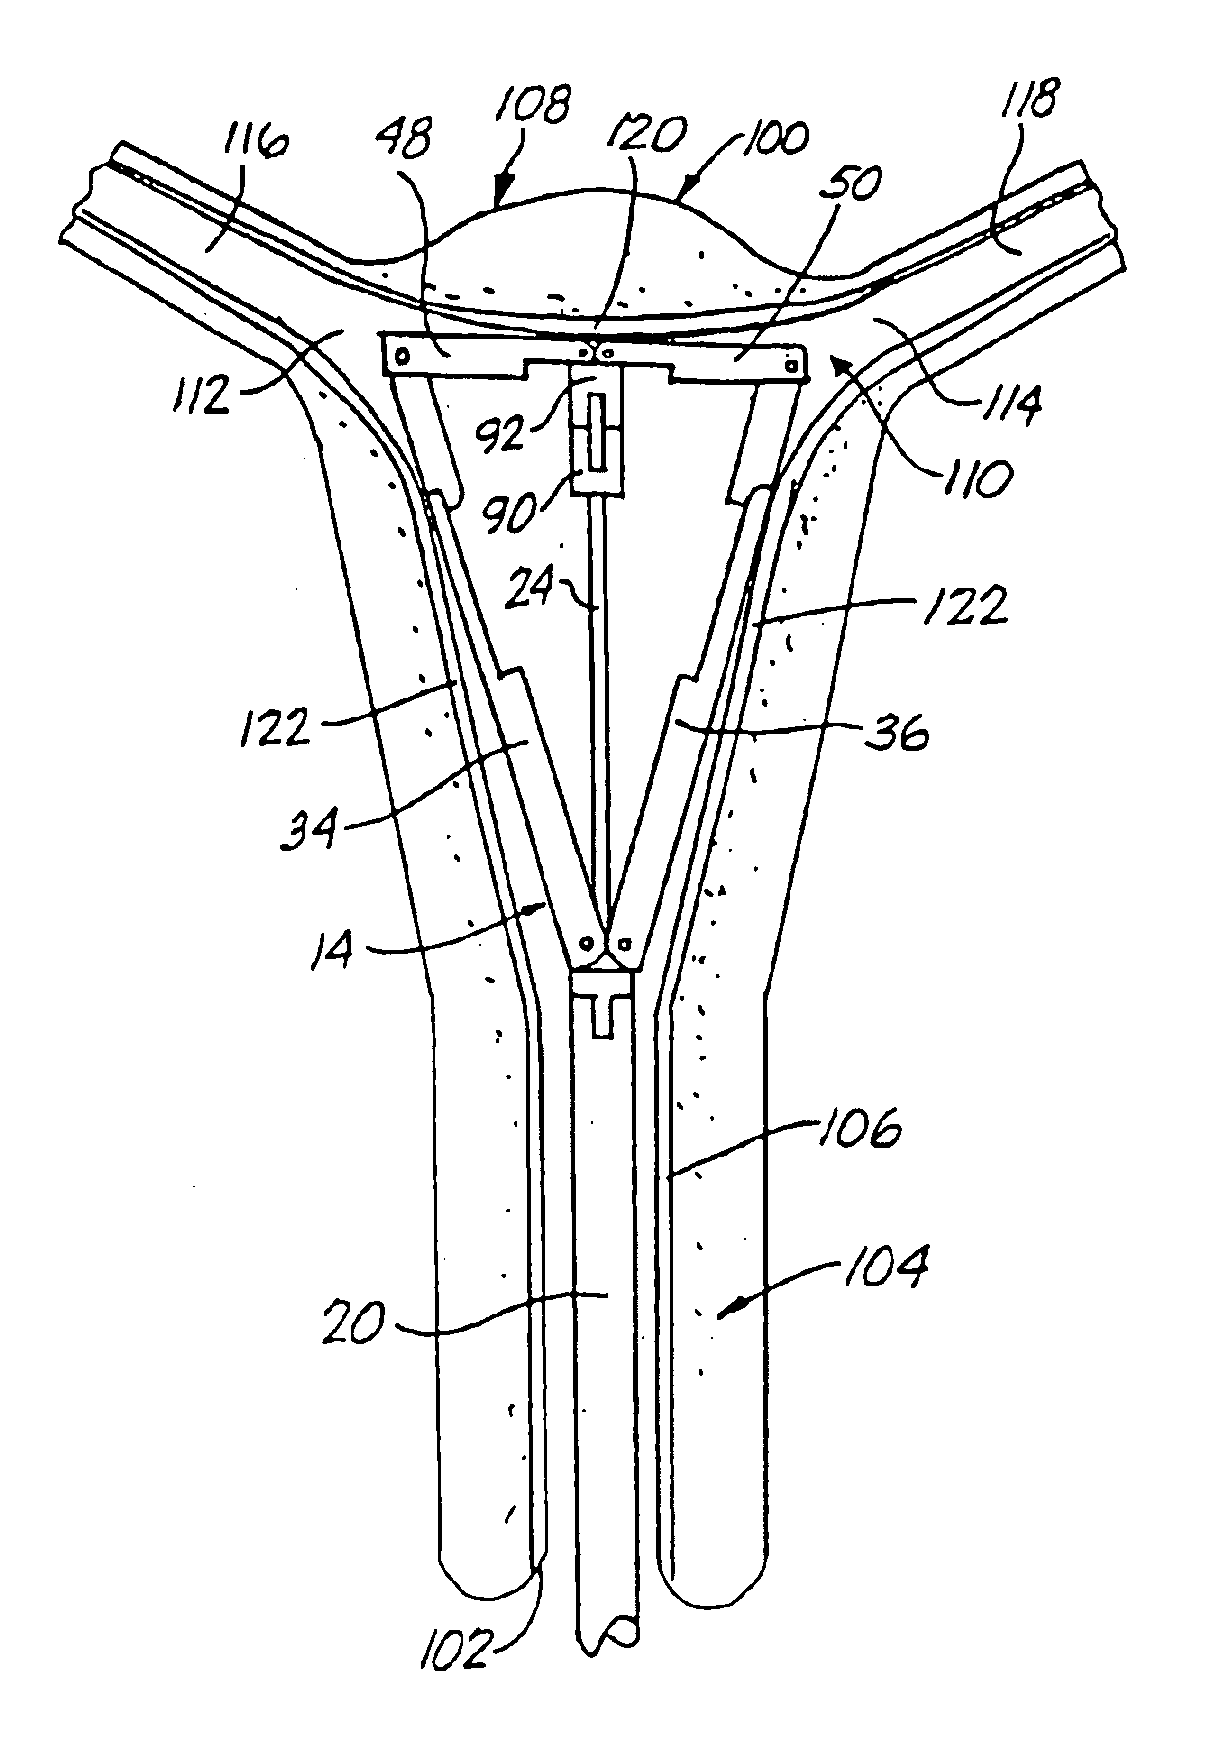 RF device for treating the uterus